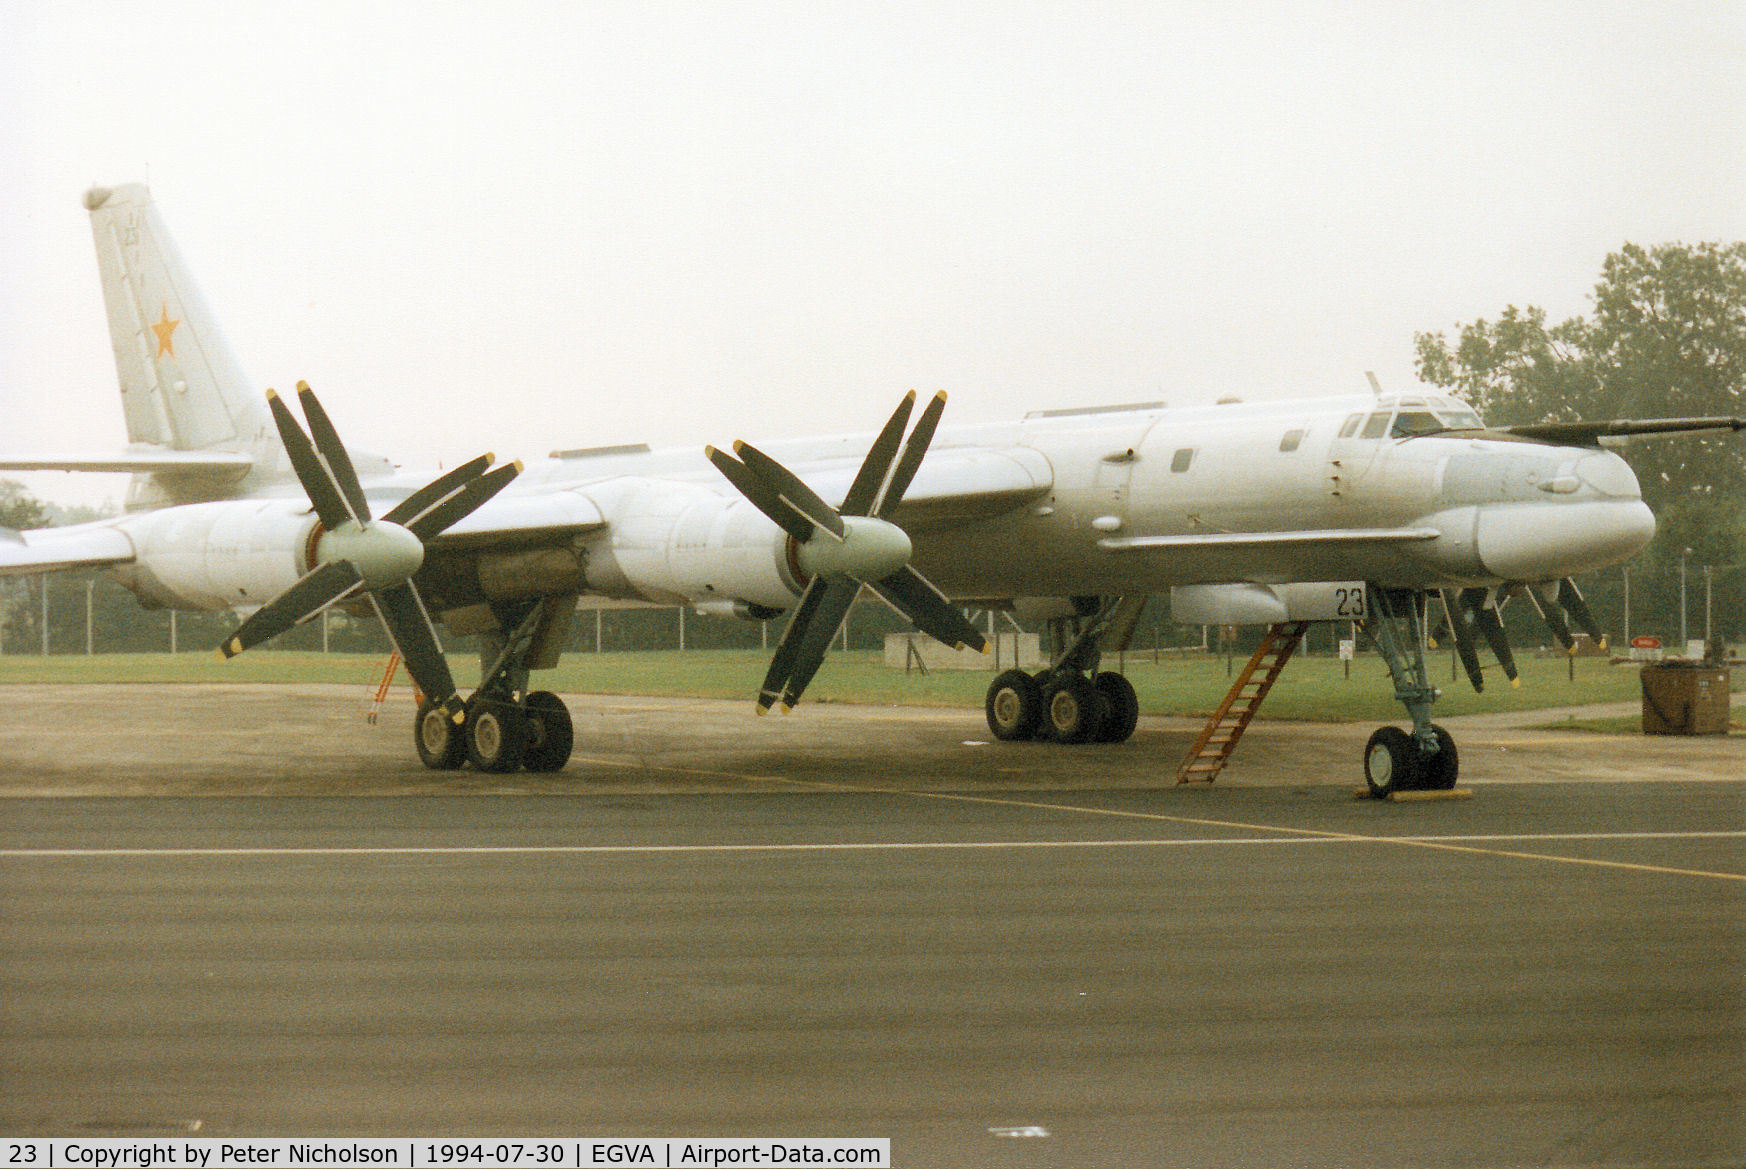 23, Tupolev Tu-95MS C/N 34379, Tupolev Tu-95MS Bear H of 182nd Heavy Bomber Regiment on display at the 1994 Intnl Air Tattoo at RAF Fairford.